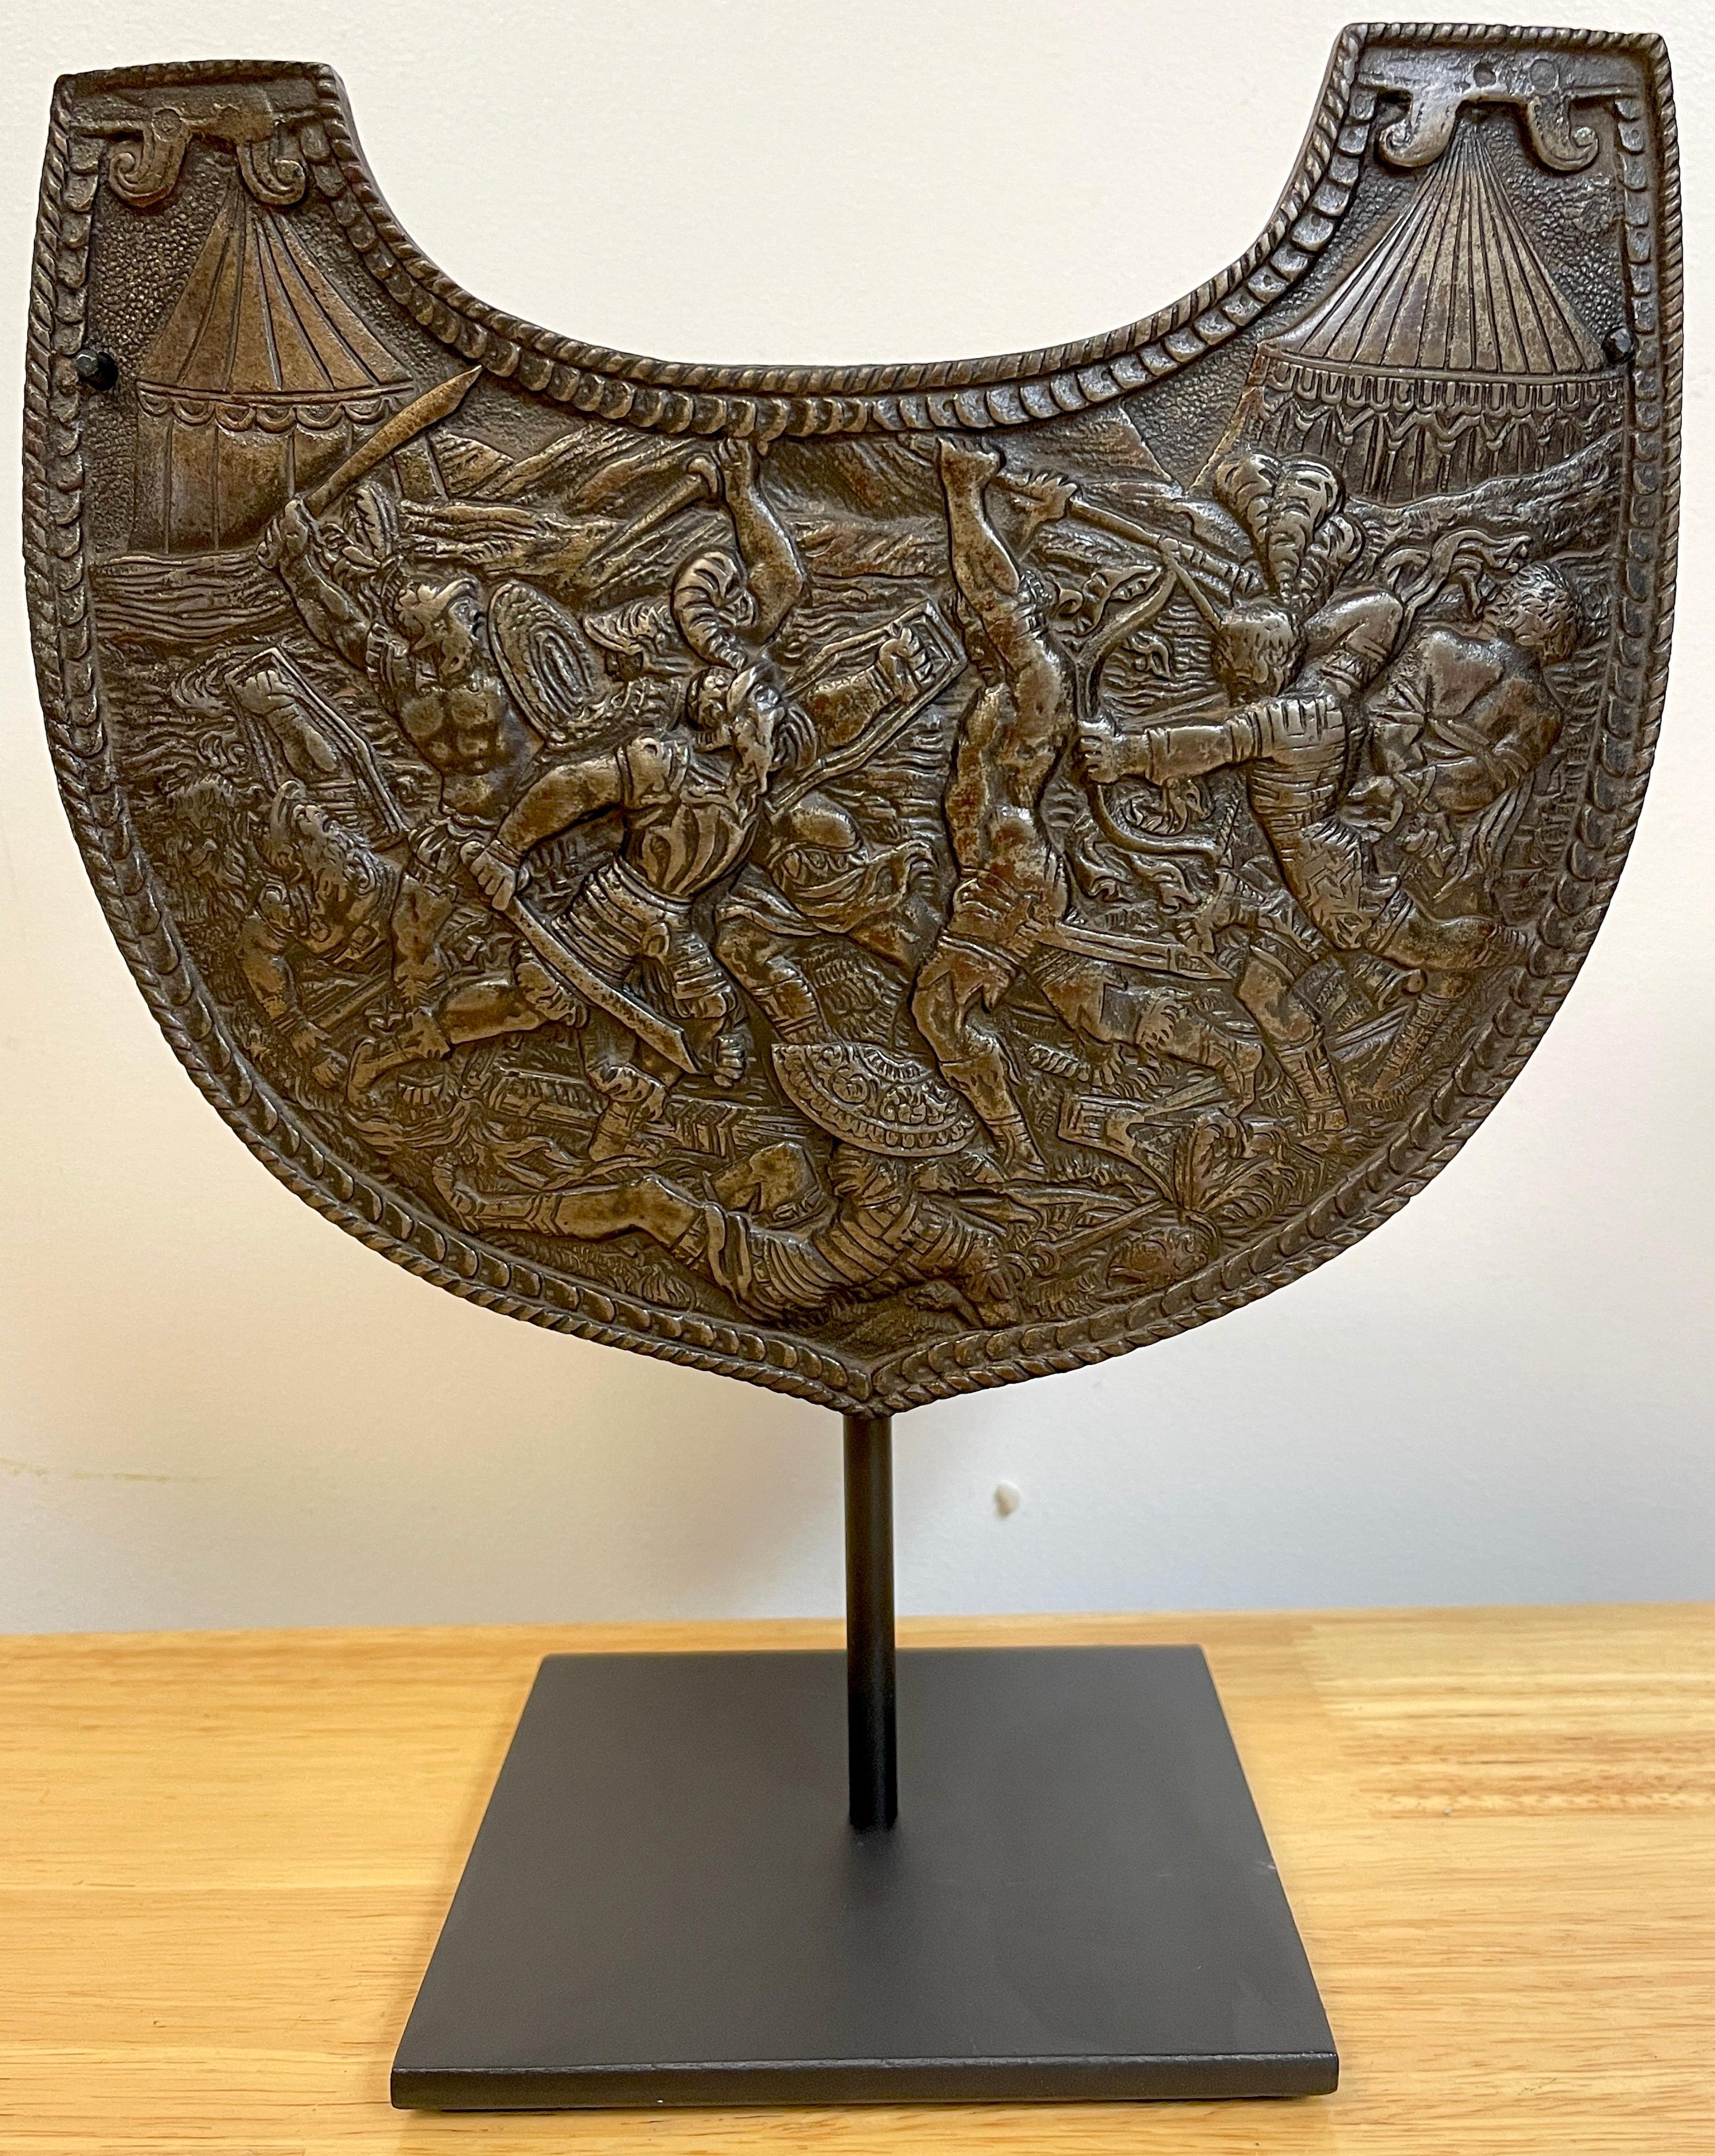 19th c Grand Tour Roman style iron gorget on stand
Decorated with a intense battle scene with Imperial Roman soldiers fighting native warriors, with two Roman Campaign tents in landscape. Museum mounted on a ebonized iron stand. 
Gorget alone 10-